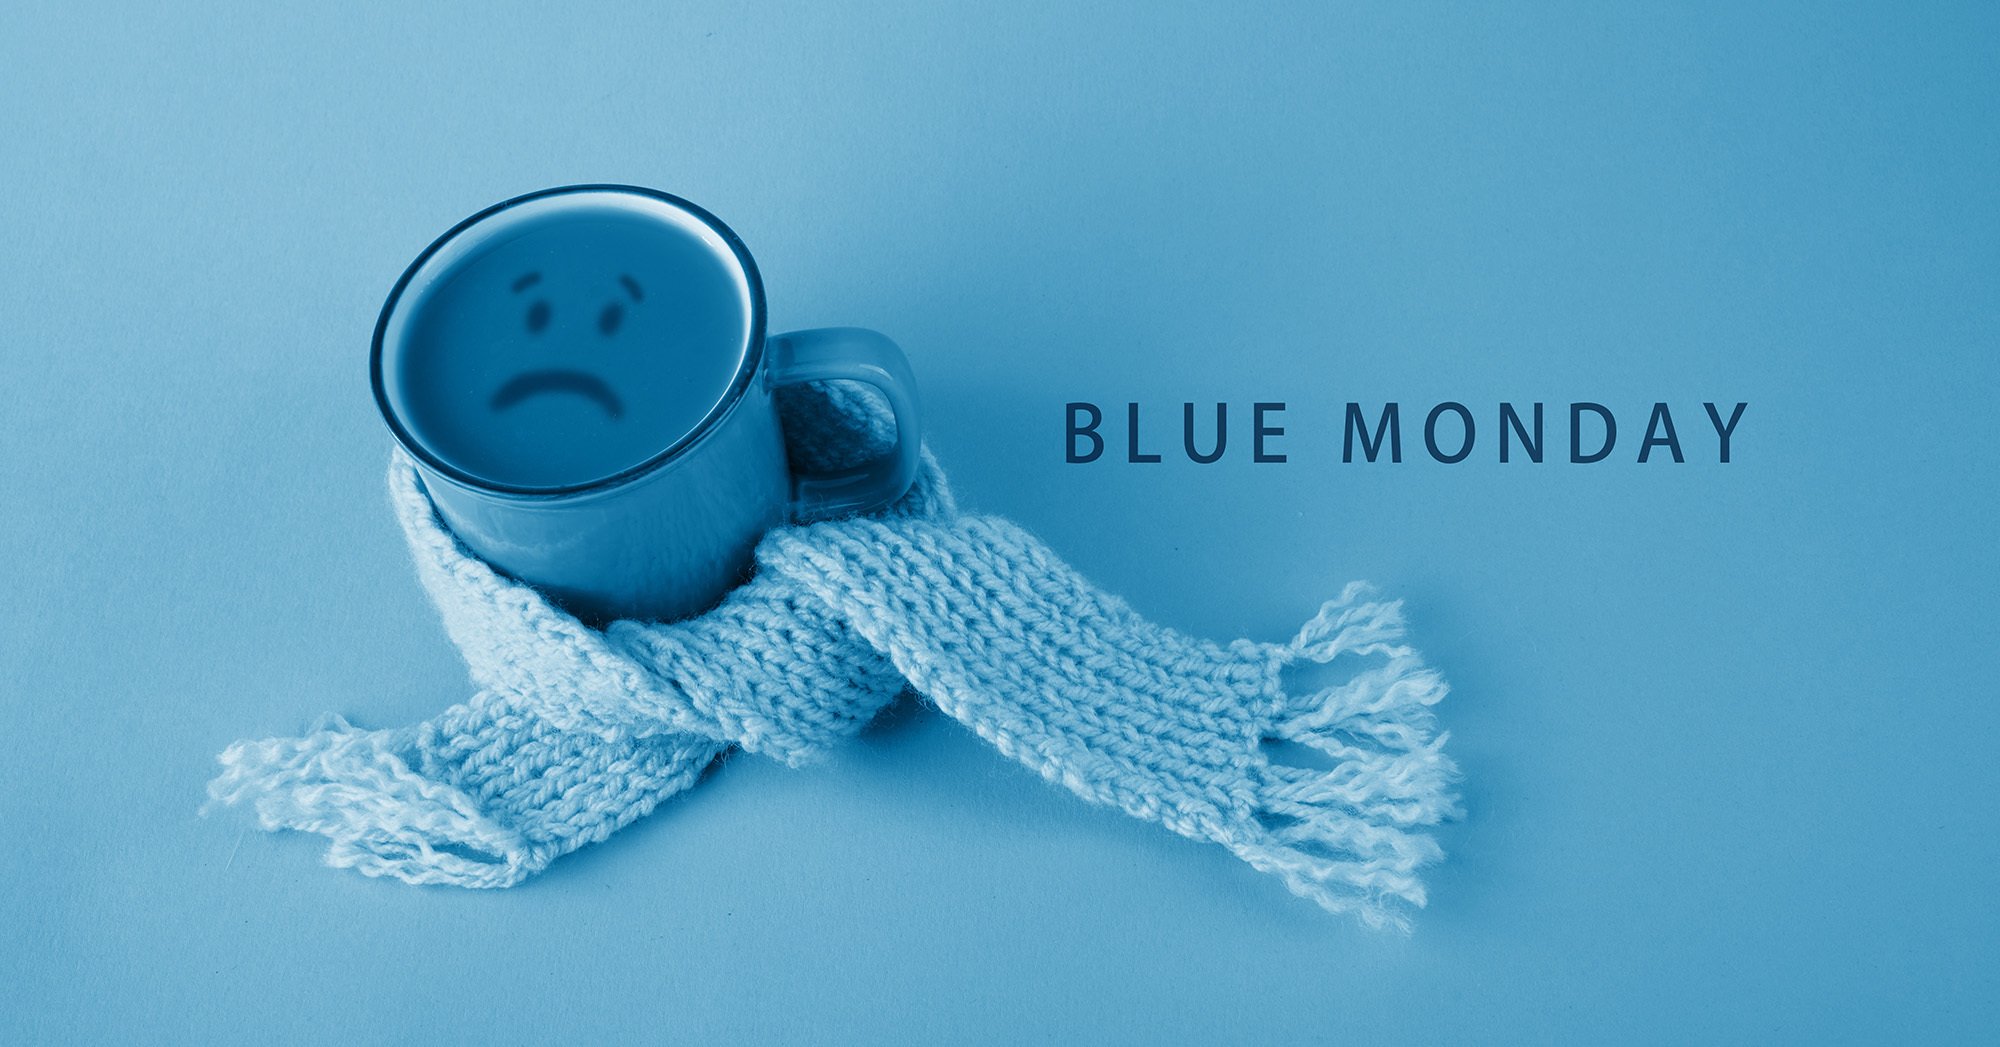 Blue Monday is when the symptoms of seasonal depression are reportedly at their worst.